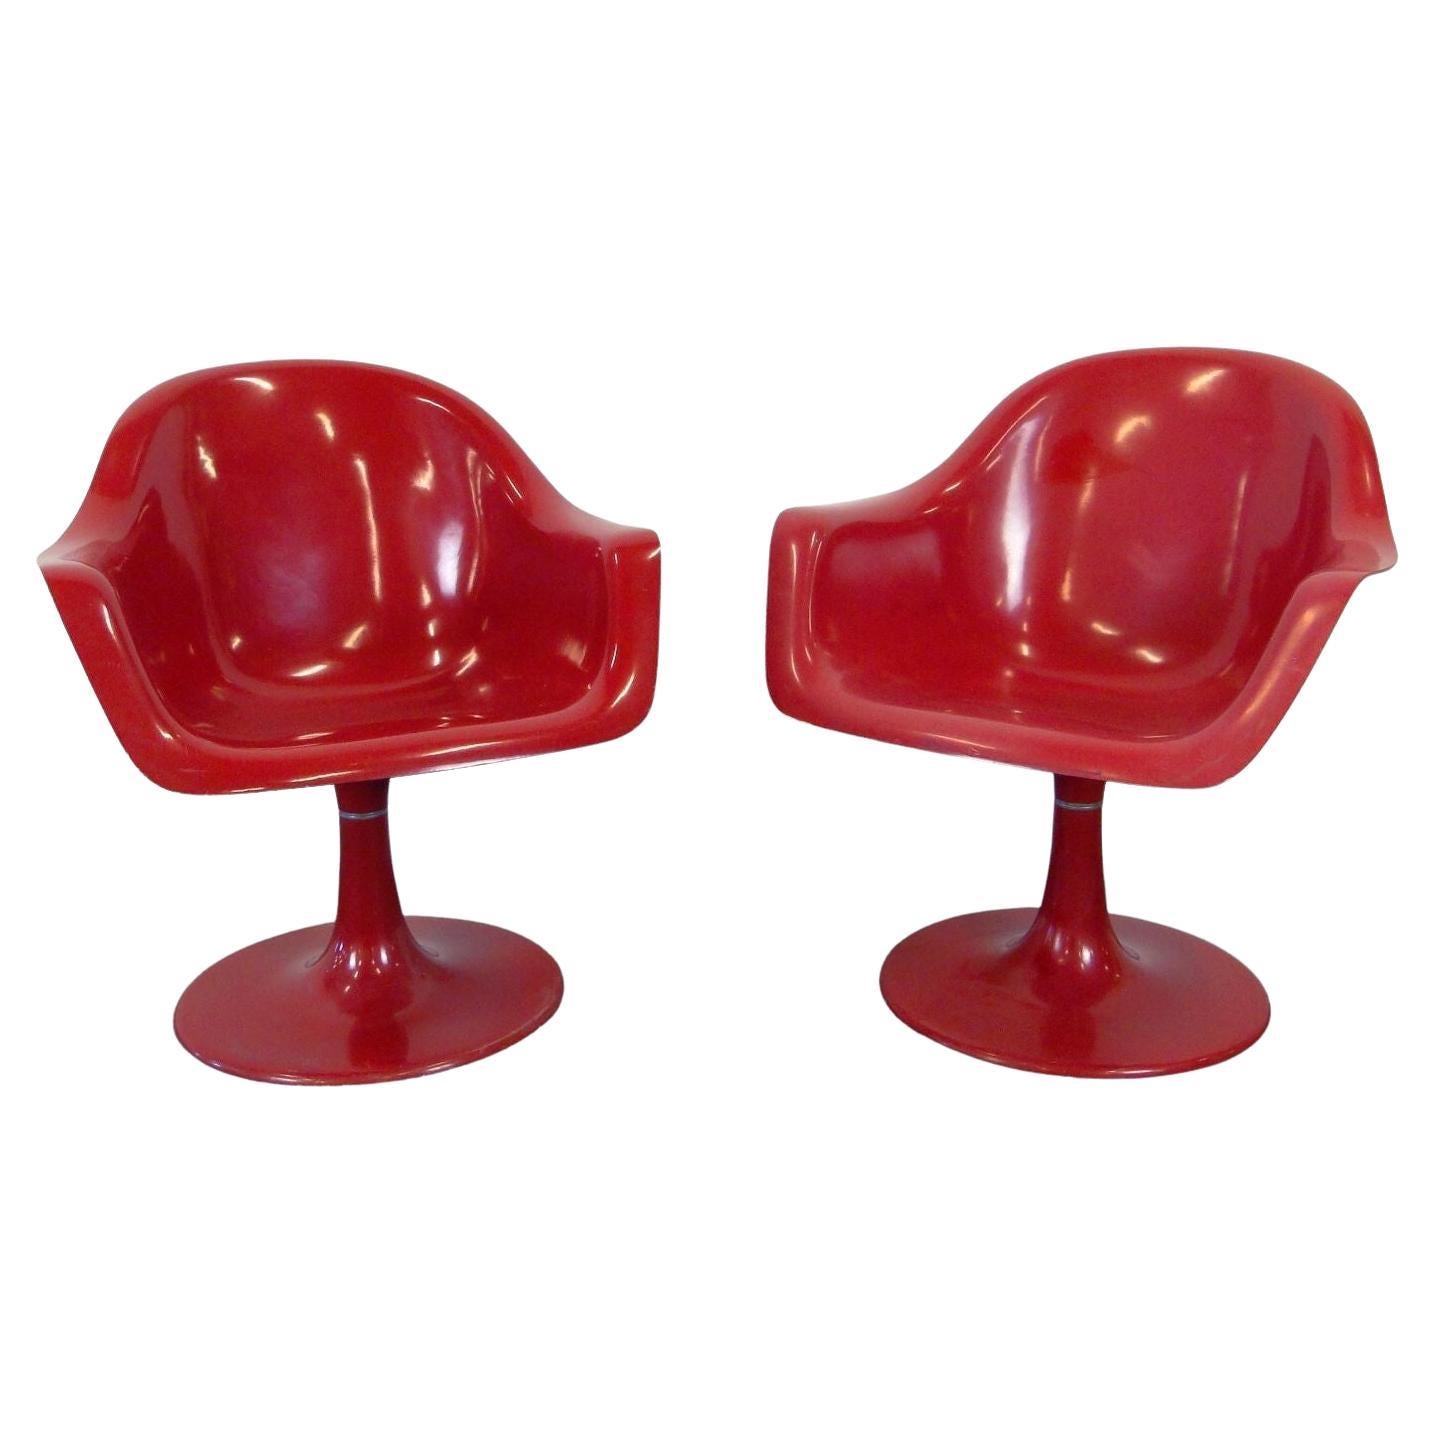 Space Age Red "Tulip" Swivel Chairs by Péter Ghyczy, Germany 1970s